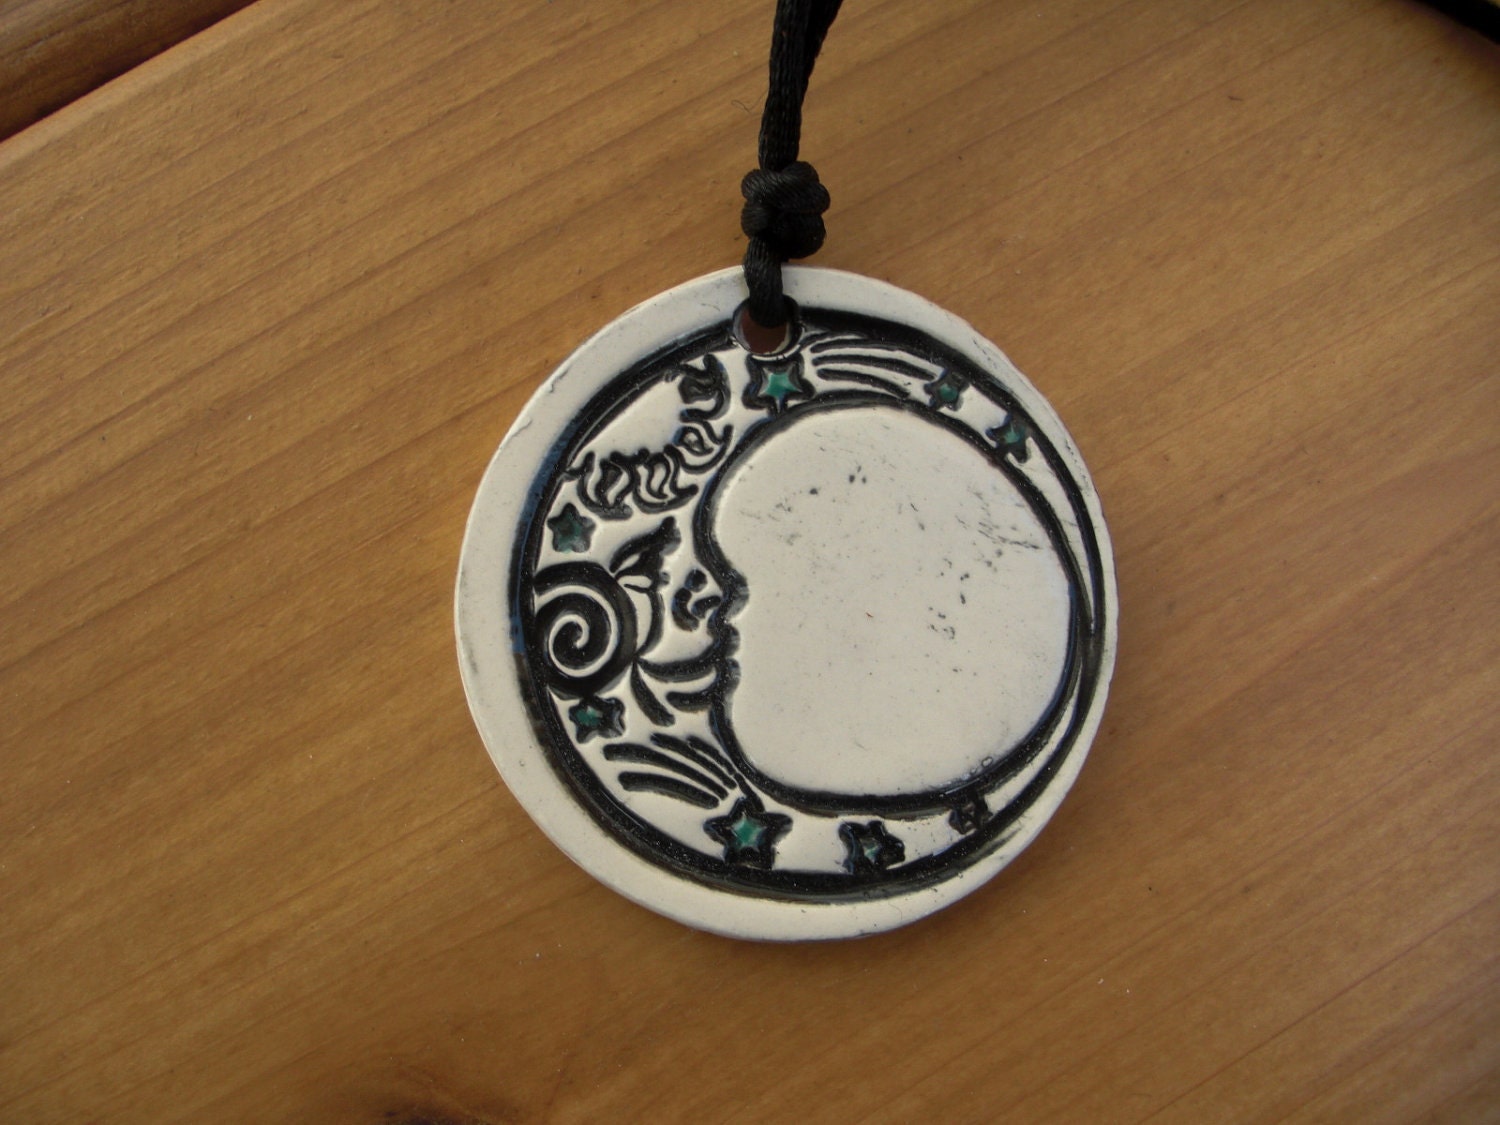 Sun Moon and Stars Ceramic Ornament in Black and Teal - 8notes